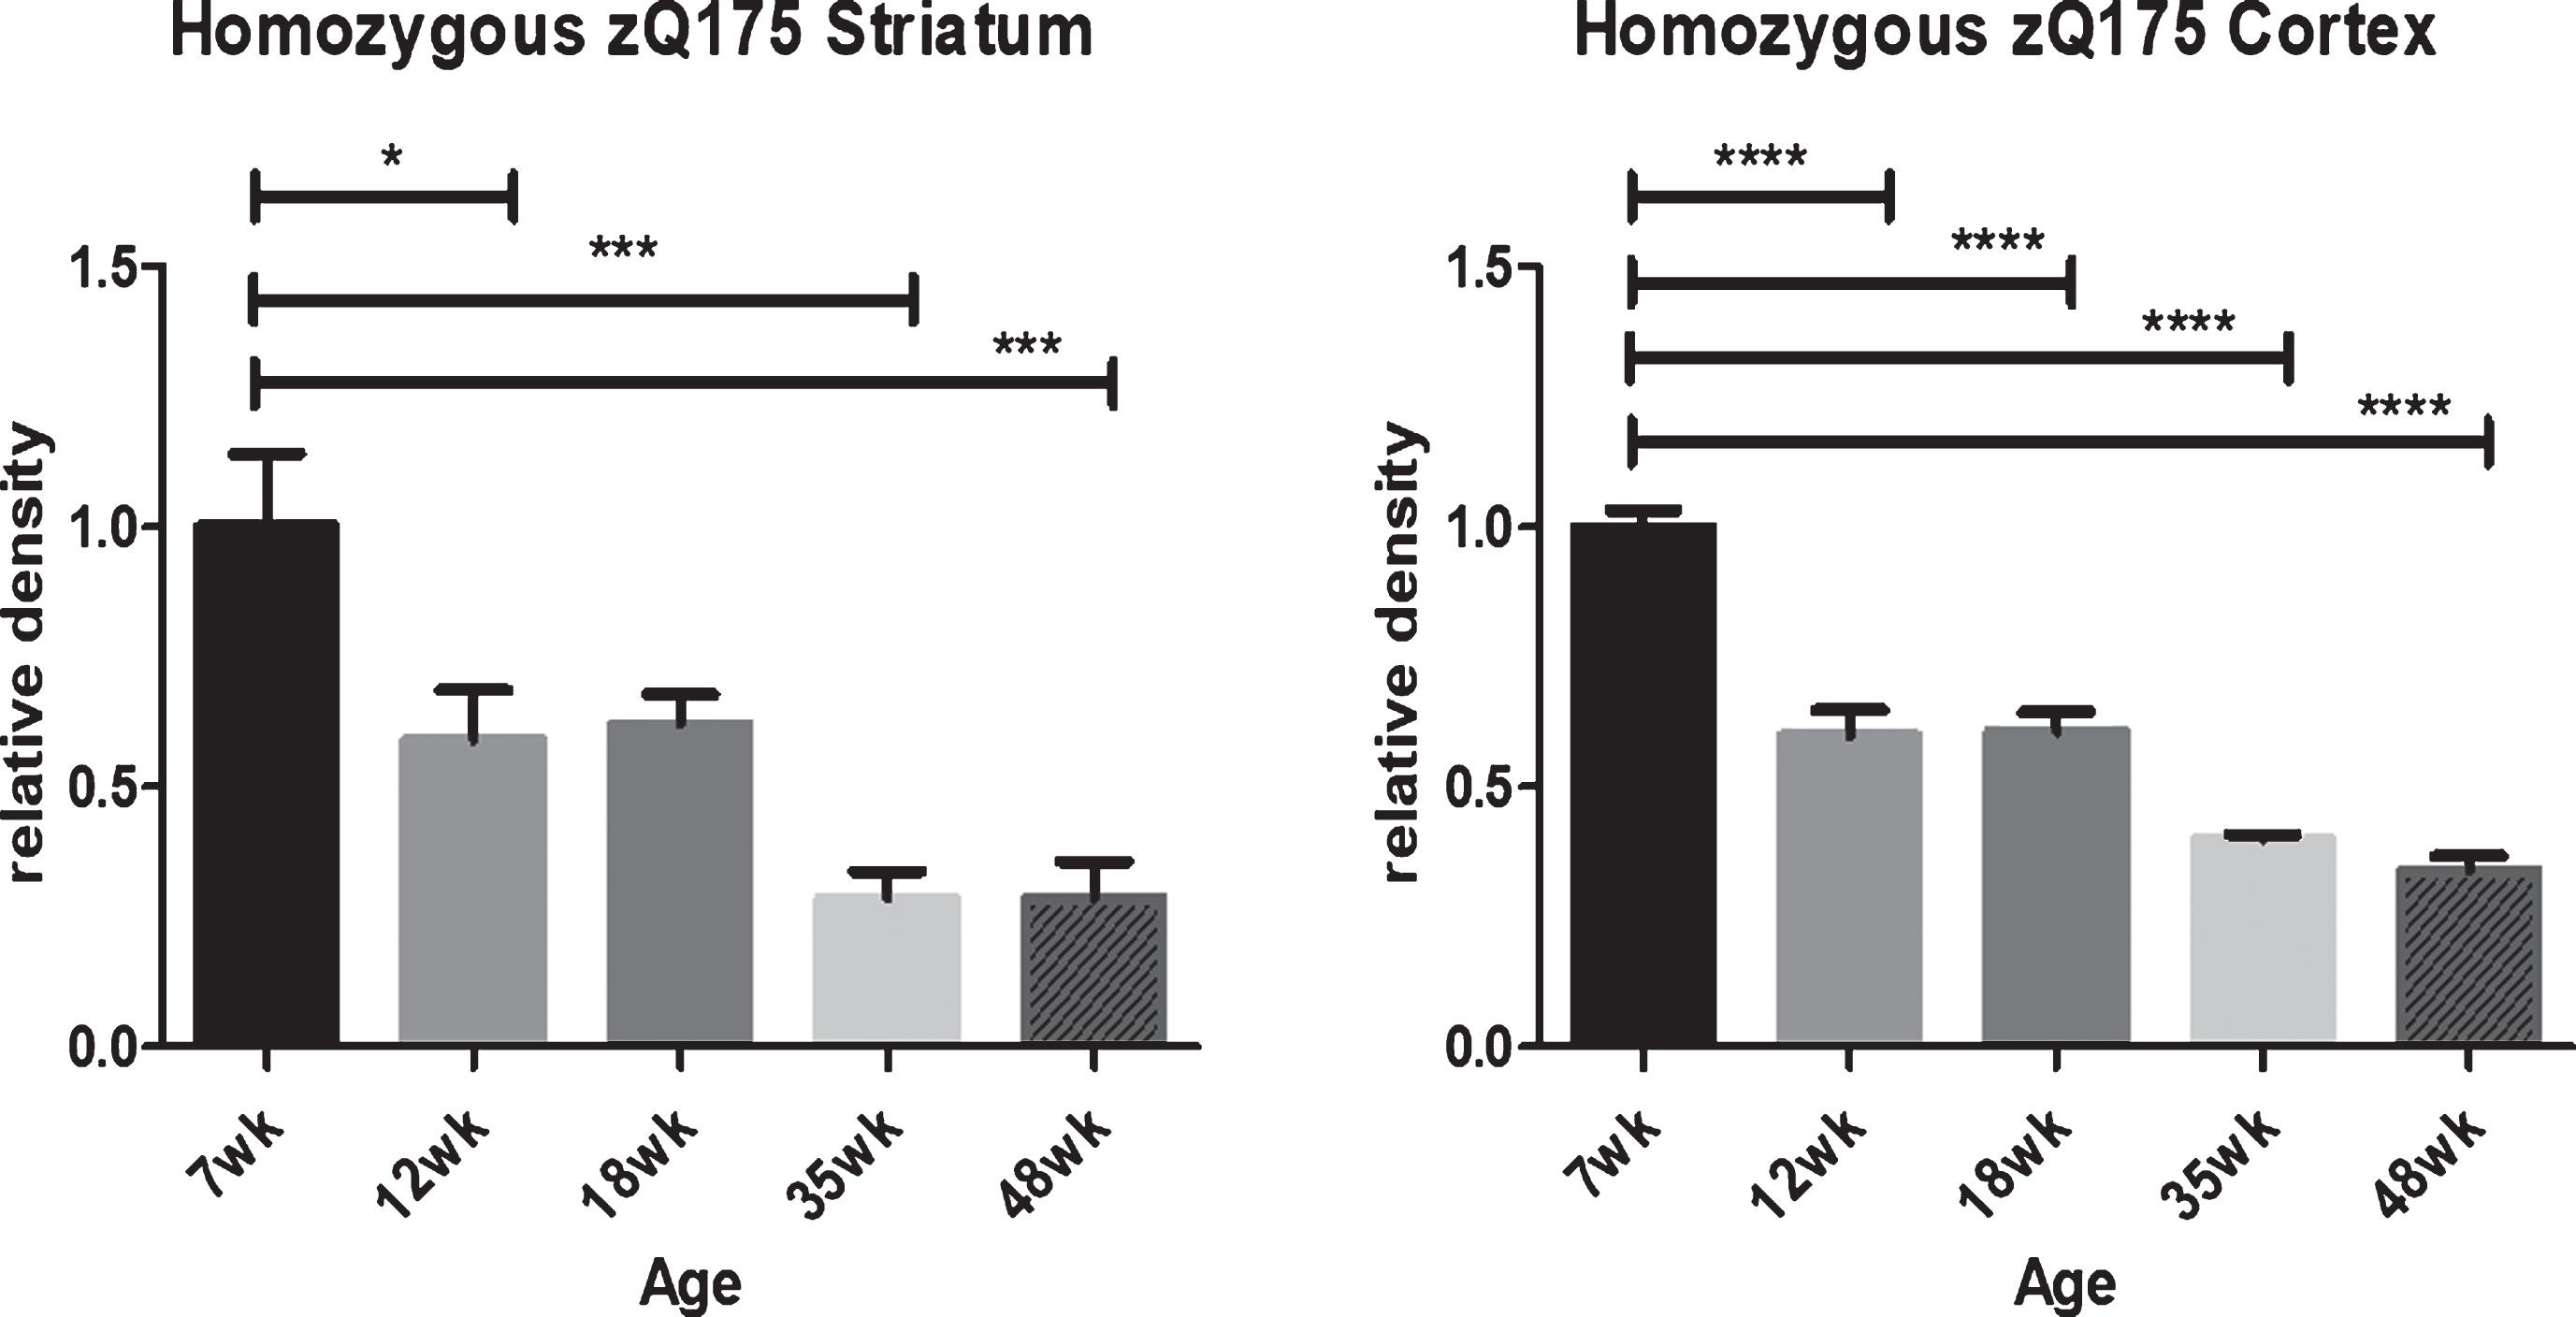 HTT levels decline in mutant homozygous zQ175 striatum and cortex with aging as detected by immunohistochemistry with D7F7 anti-HTT antibody. In homozygous zQ175 knock-in mutant mice there is a dramatic reduction in anti-HTT D7F7 detectable mutant HTT by immunohistochemistry analysis (IHC) in both striatum and cortex with age. Consistent regions of interest were identified and the mean density and standard deviation determined for each group of five mice. Statistical differences were determined using one-way ANOVA with Bonferroni’s Multiple Comparison Test. *p < 0.05, ***p < 0.001, ****p < 0.0001. Graphs show mean+SEM (n = 5) relative HTT density.